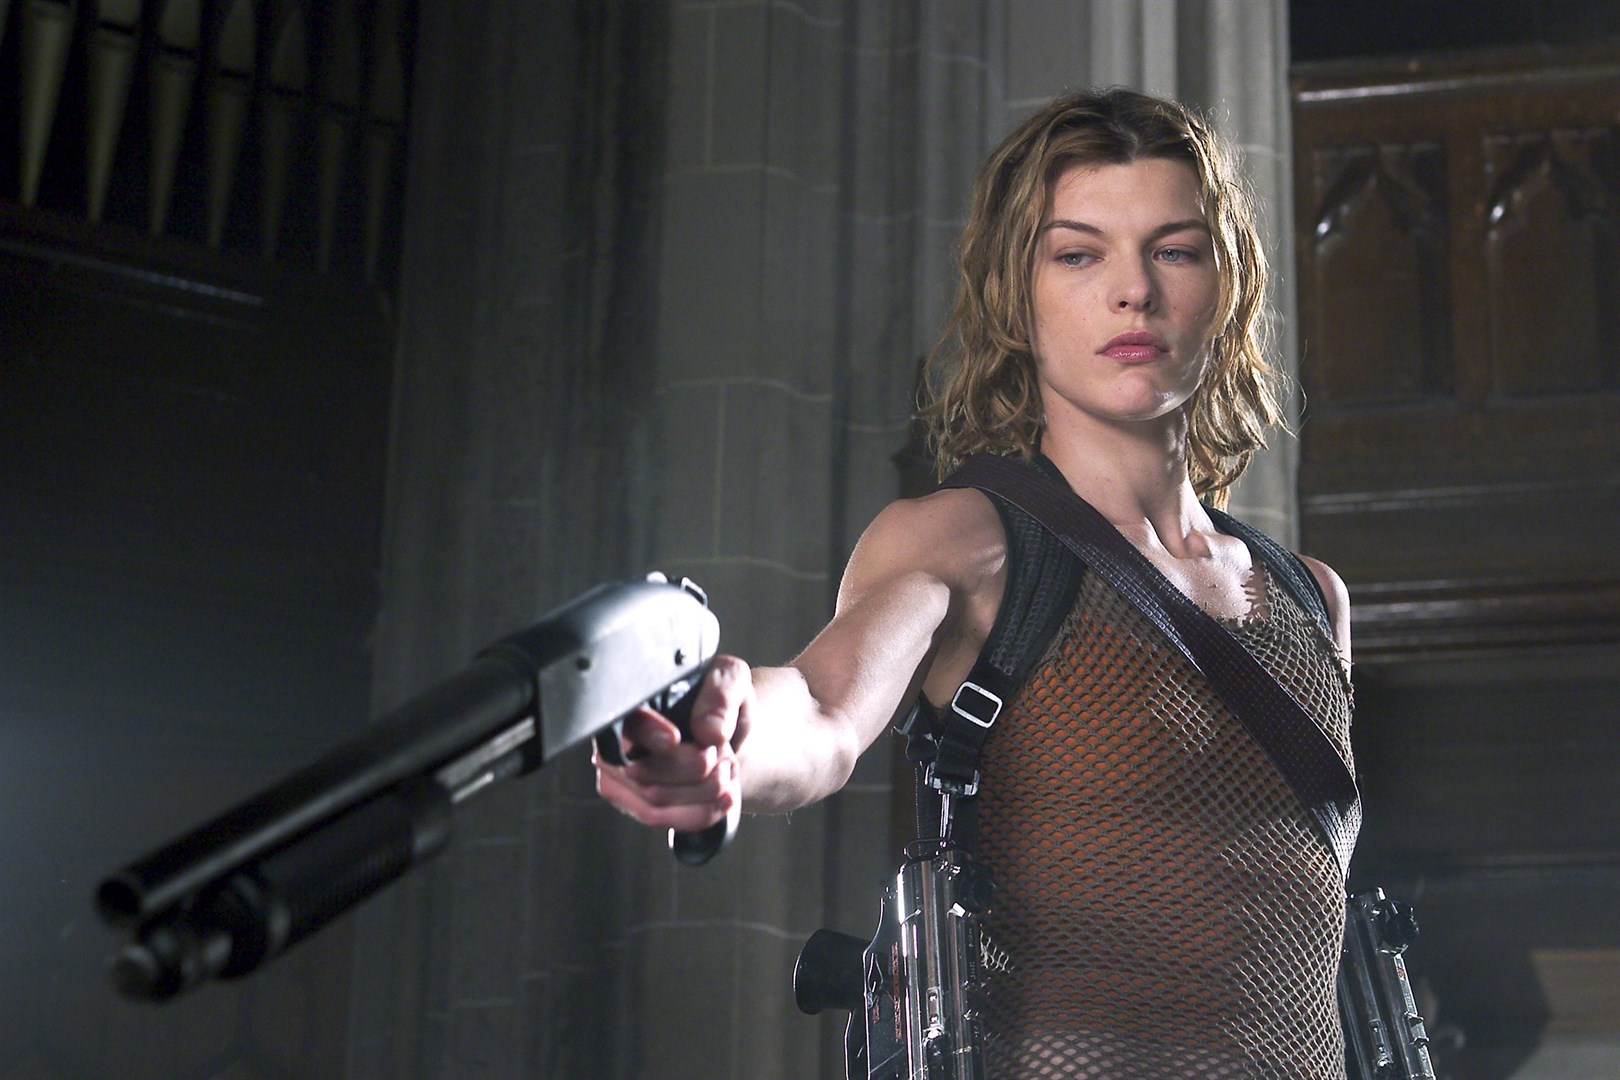 Milla Jovovich's character from Resident Evil 2: Apocalypse, Alice. She is a slim white woman with shoulder-length, greasy blonde hair. She is viewed from the waist up and is wearing a brown tank top and shoulder gun holster. She is pointing a shotgun at something off-camera.